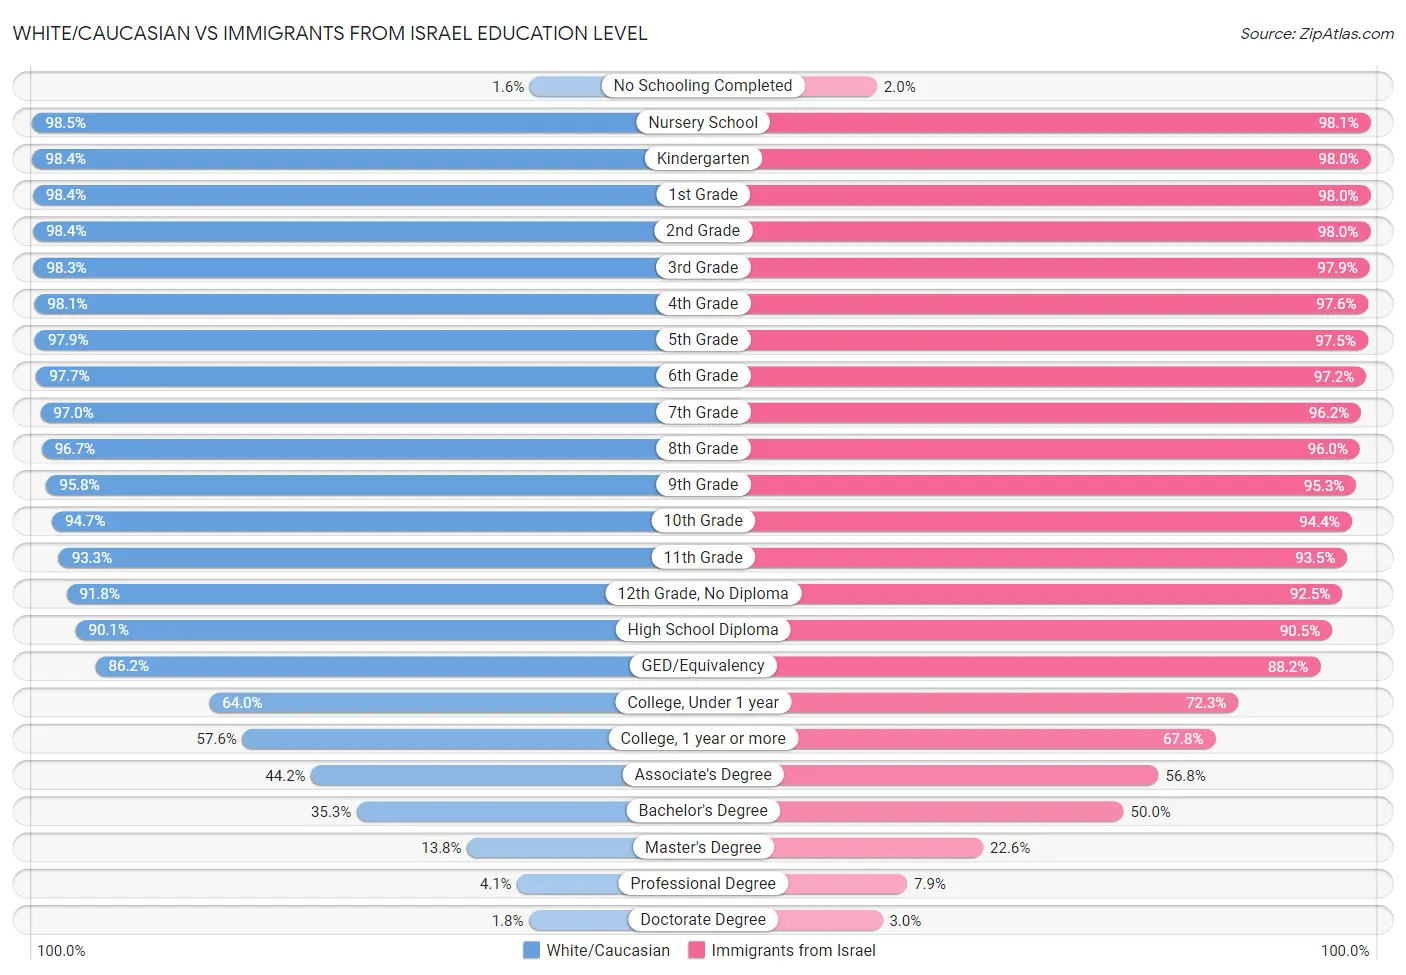 White/Caucasian vs Immigrants from Israel Education Level